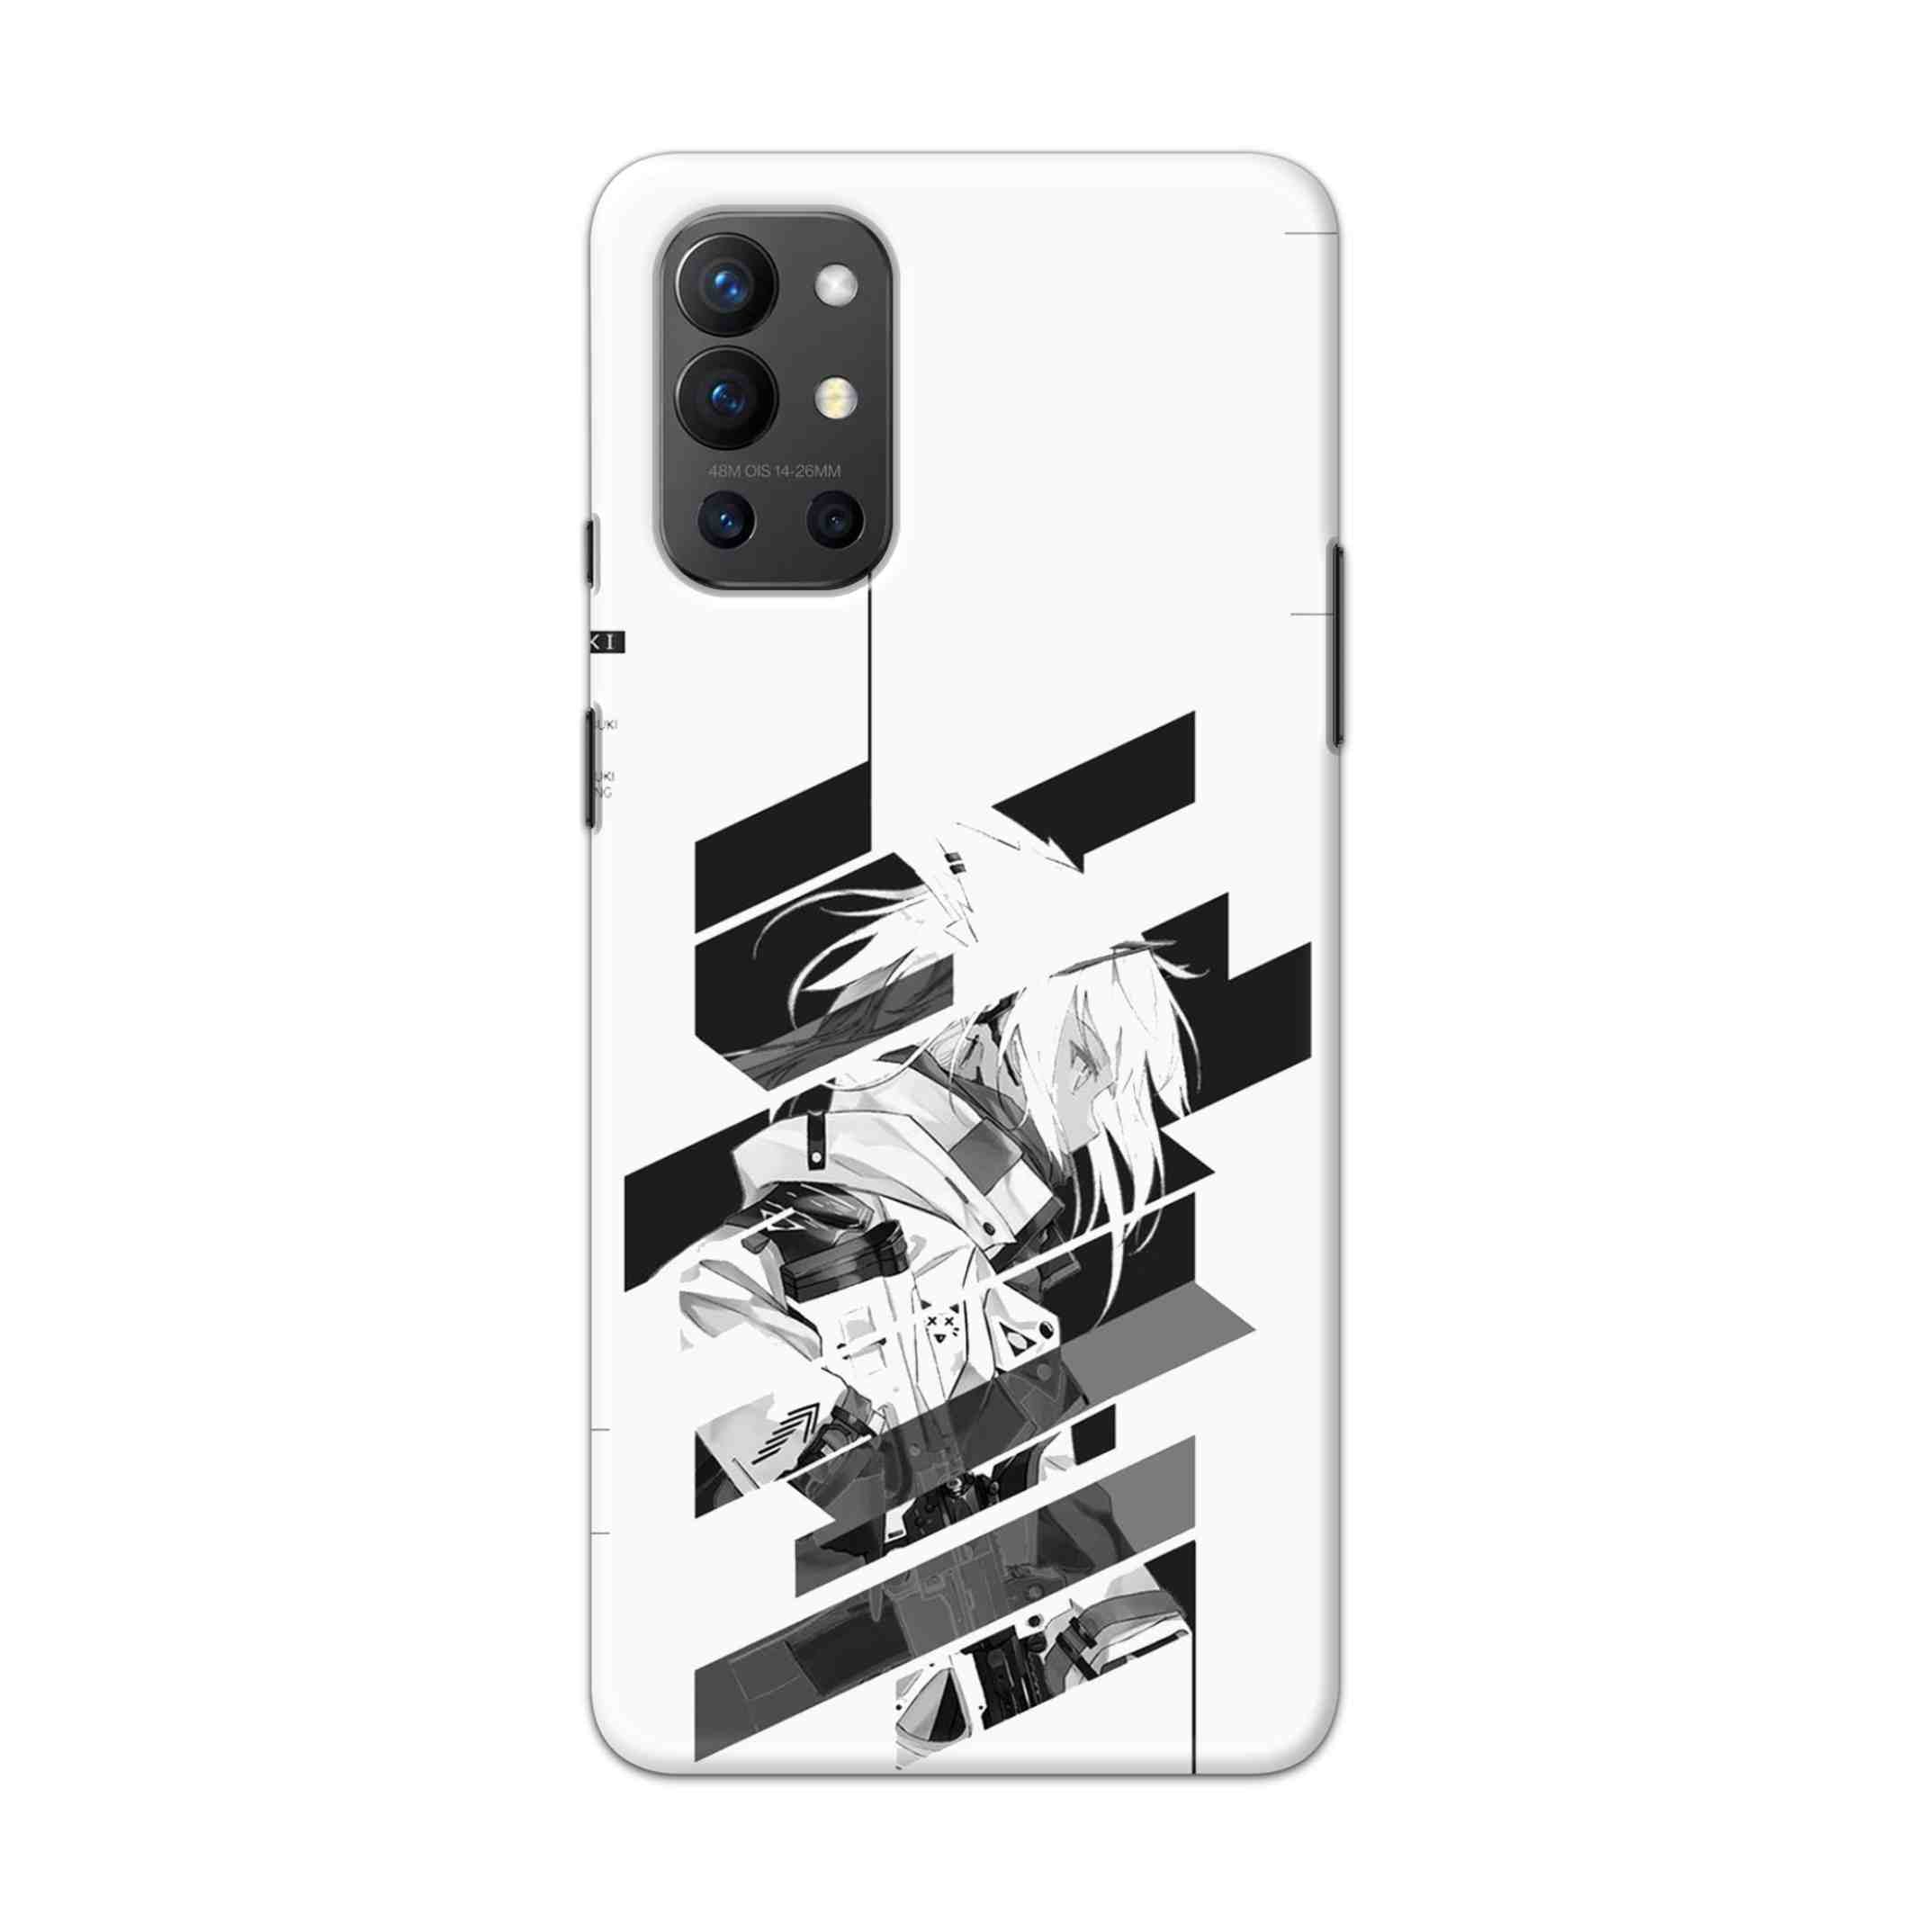 Buy Fubuki Hard Back Mobile Phone Case Cover For OnePlus 9R / 8T Online